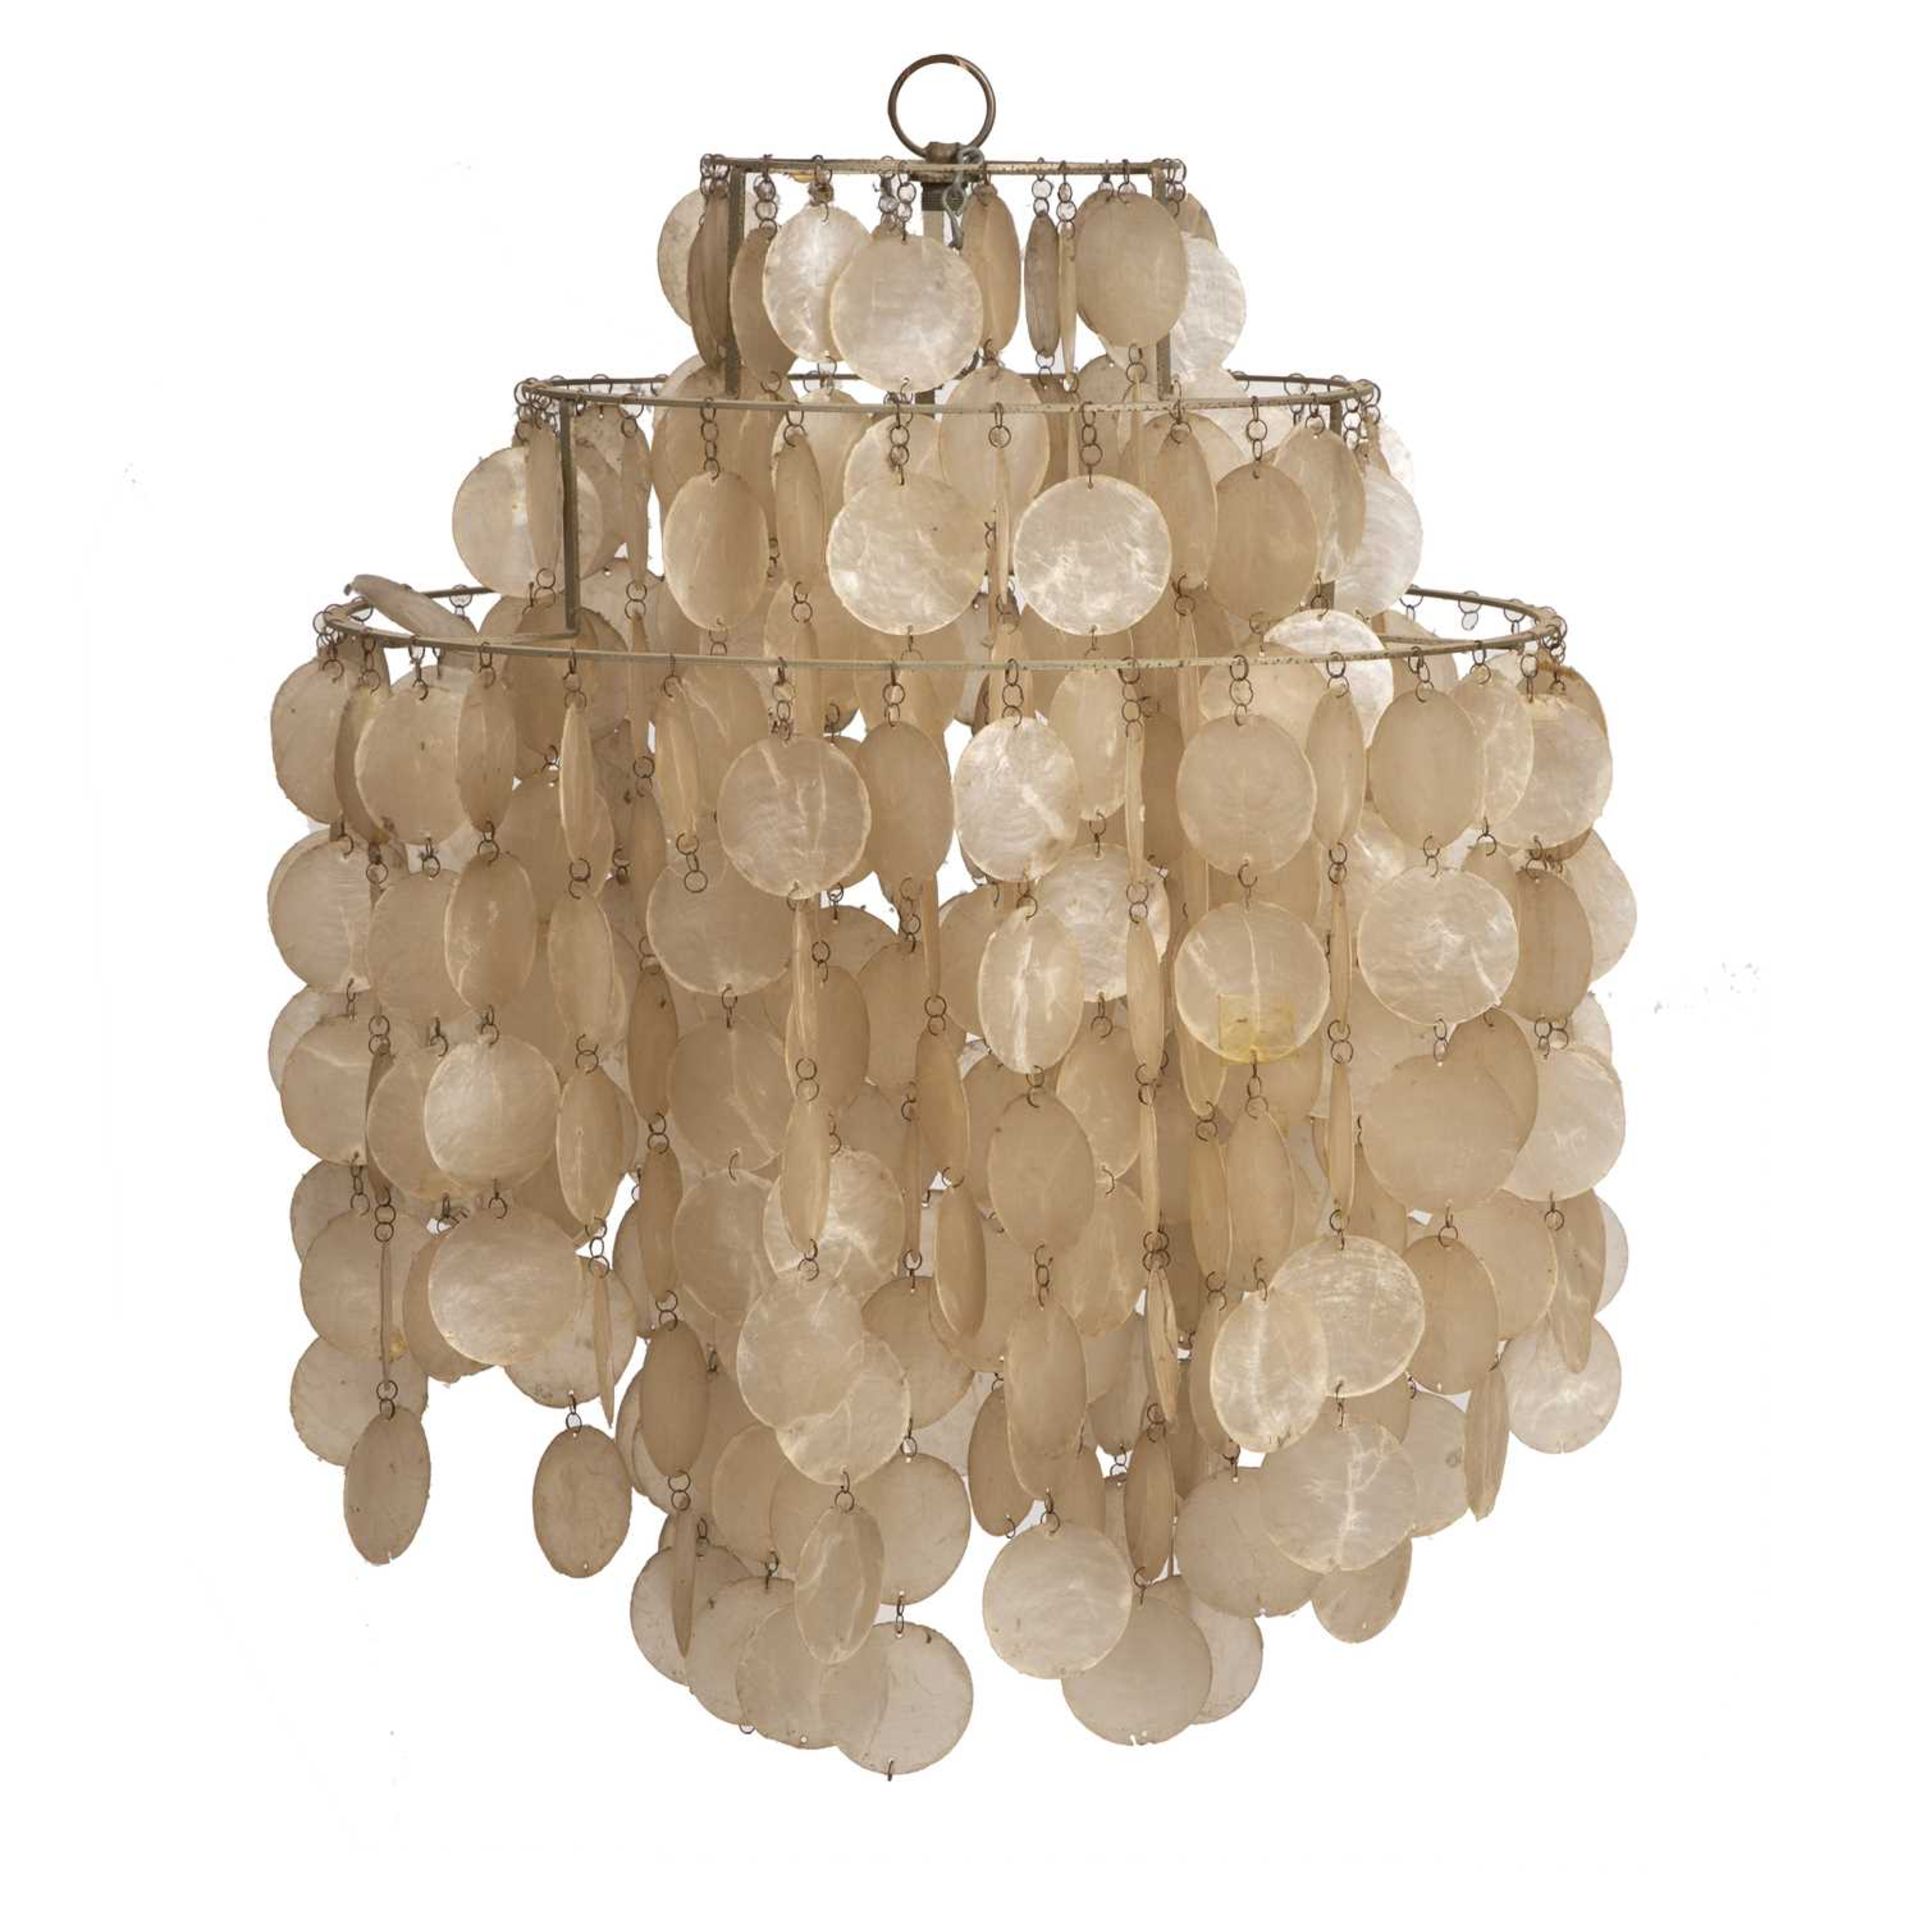 Verner Panton (1926-1998) 1DM Fun chandelier, originally designed in 1964 metal chains and shell